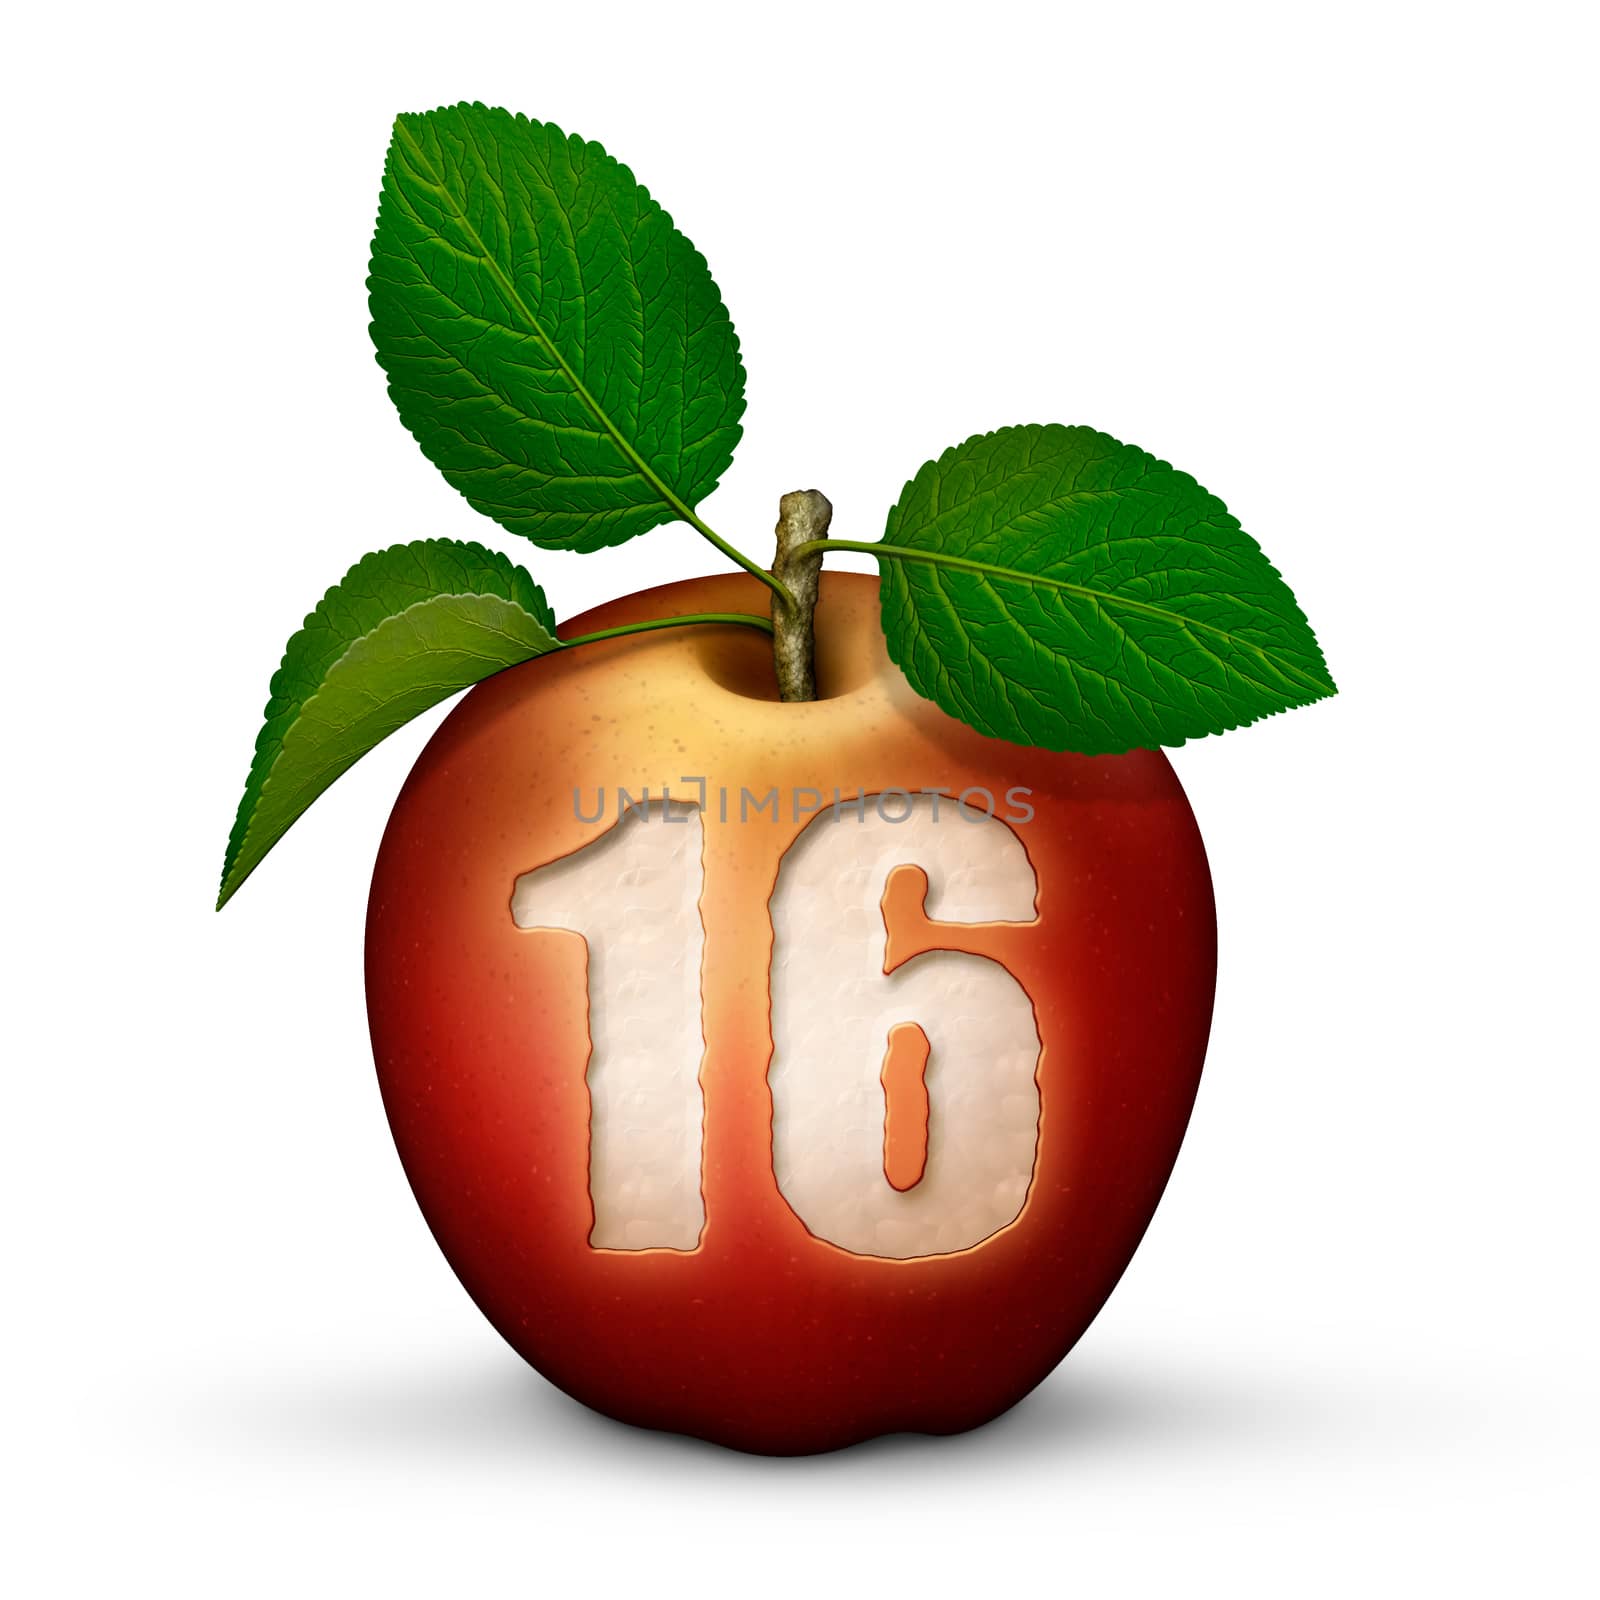 3D illustration of an apple with the number 16 bitten out of it.